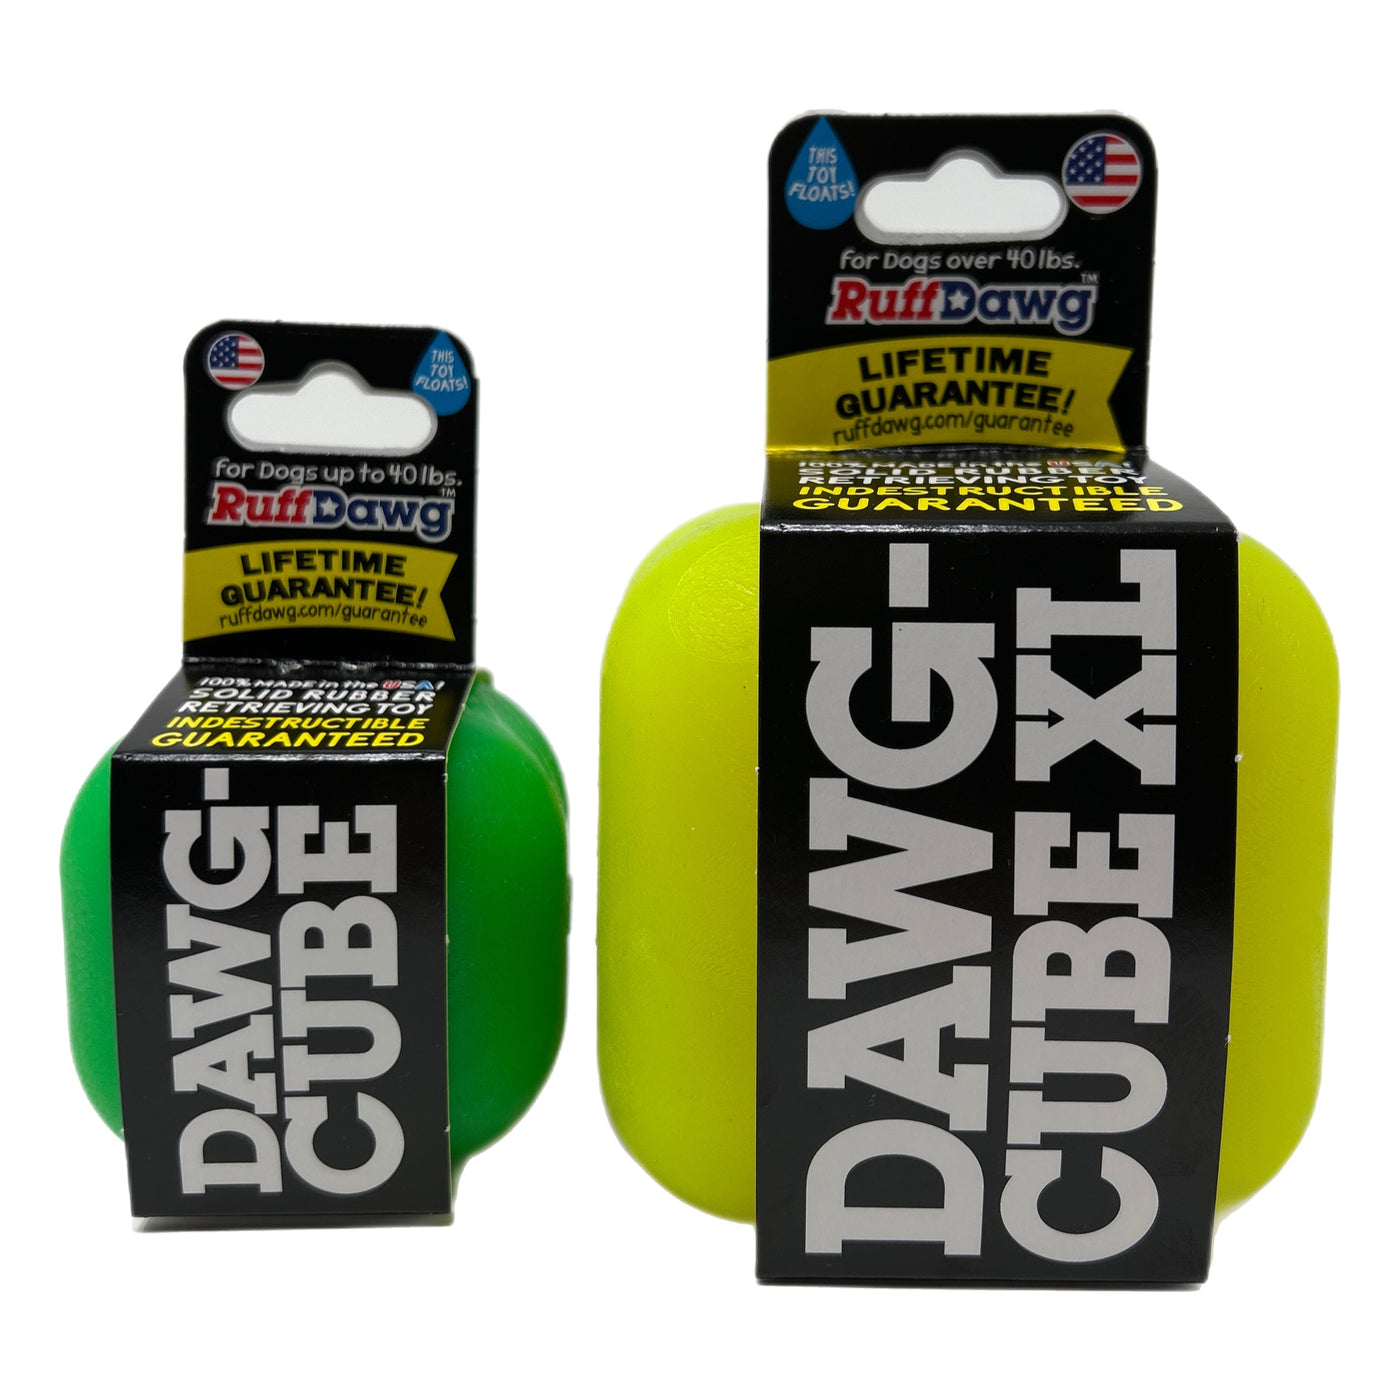 Dawg Cube Rubber Dog Toy By RuffDawg